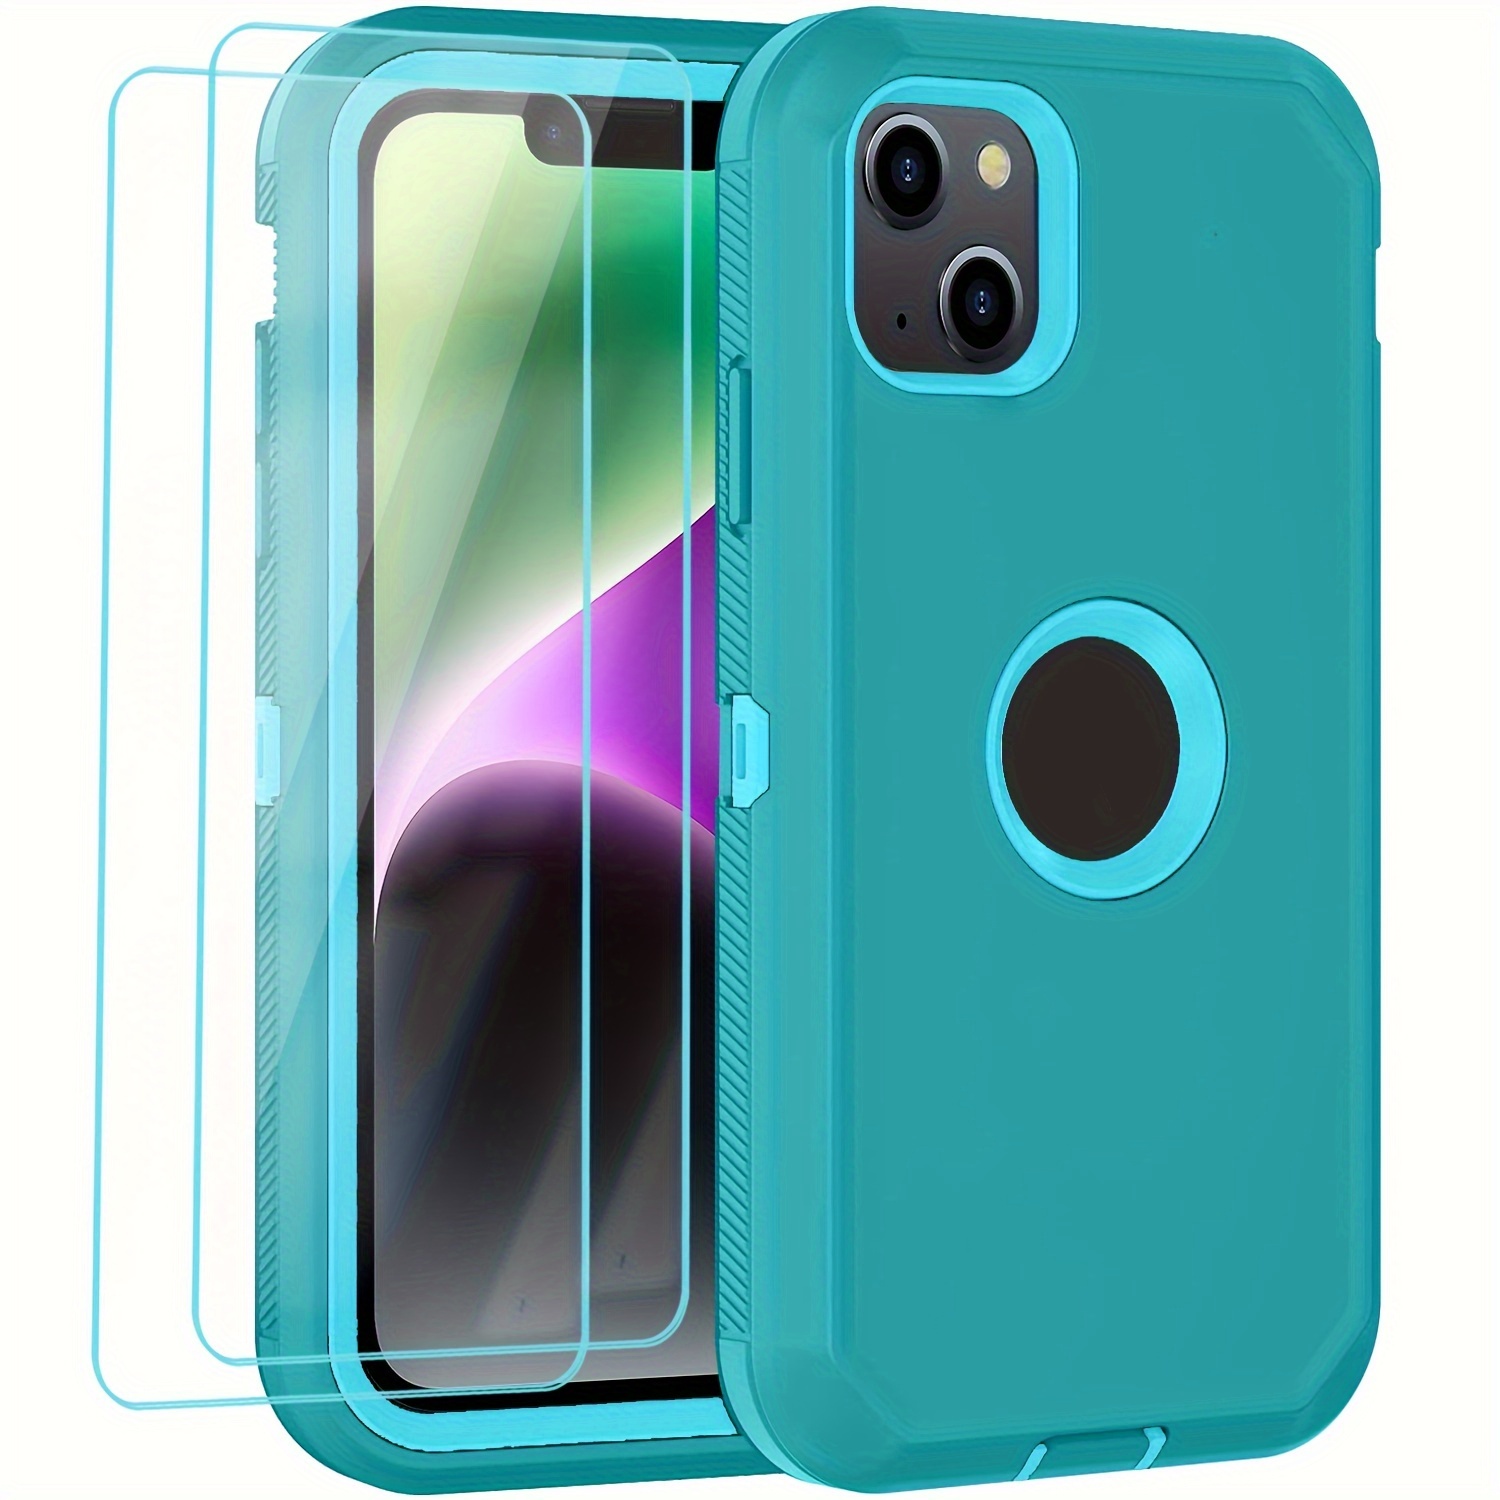 For iPhone 7 Plus Case Rugged Shockproof Hard Case Protective Cover 